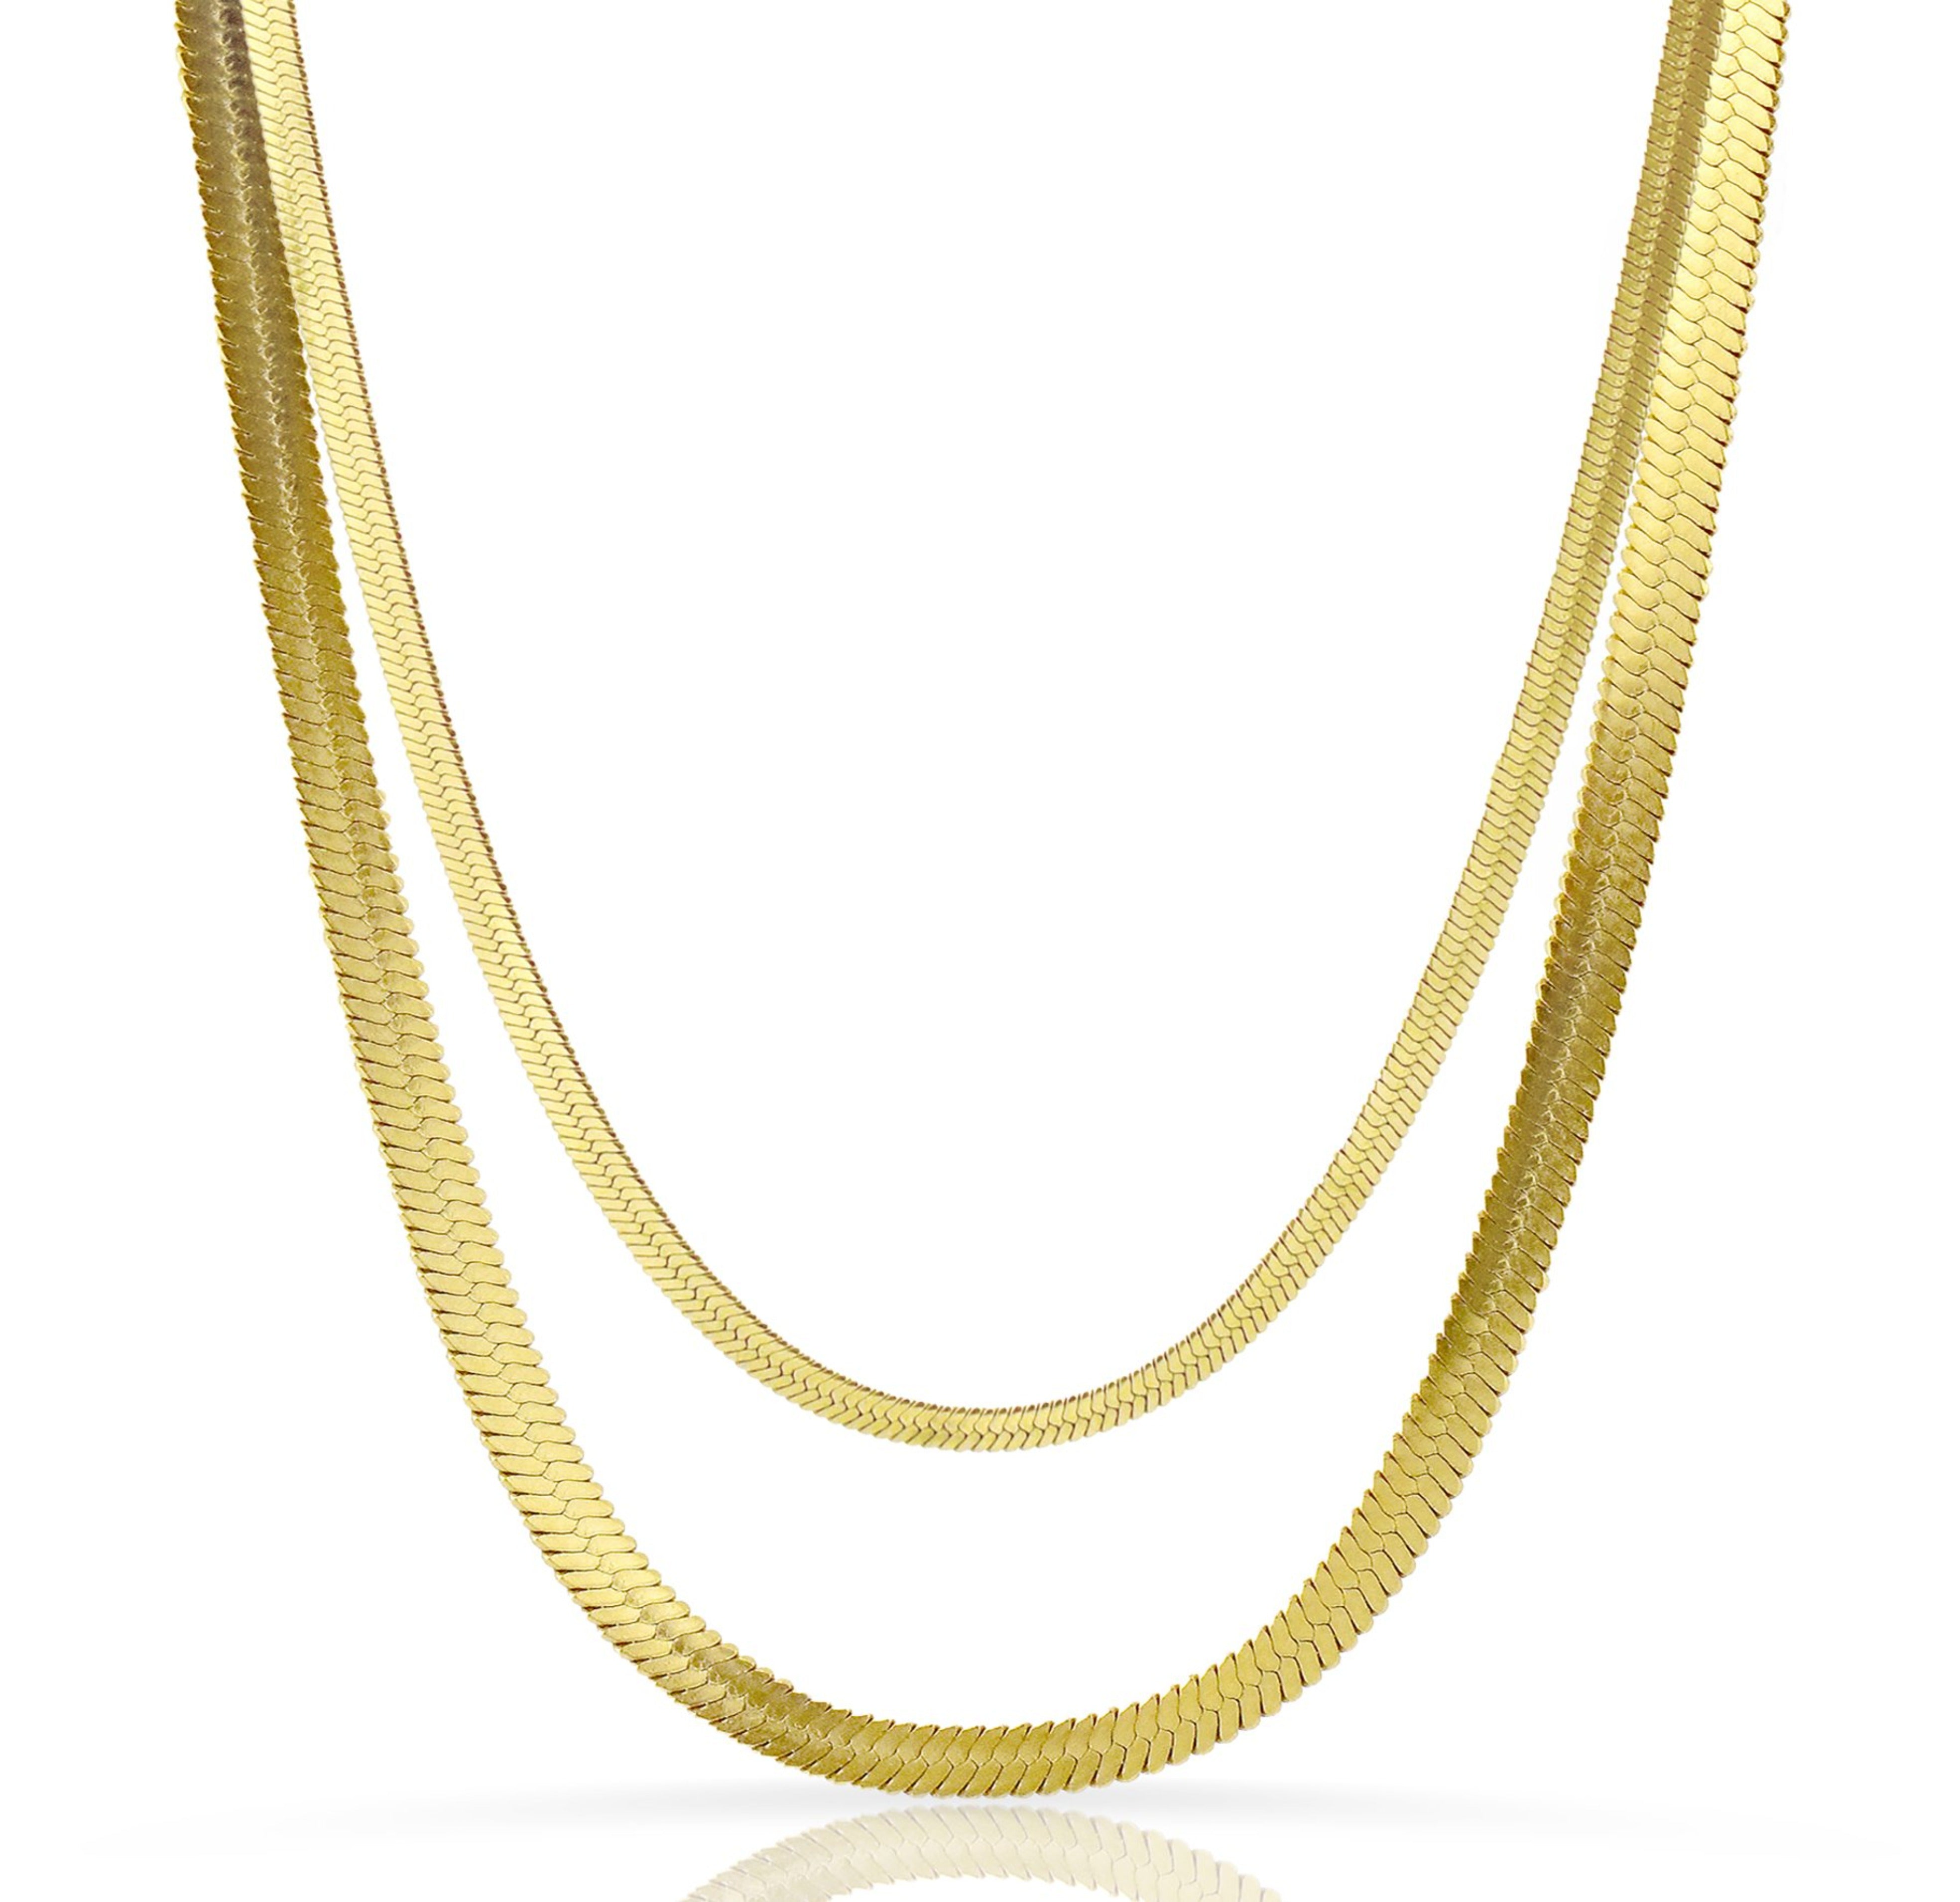 Gold Herringbone Snake Chain Gold Herringbone Necklace 10MM Flat Hip Hop  Fashion Jewelry Gift For Women And Men From Uxkst, $21.45 | DHgate.Com